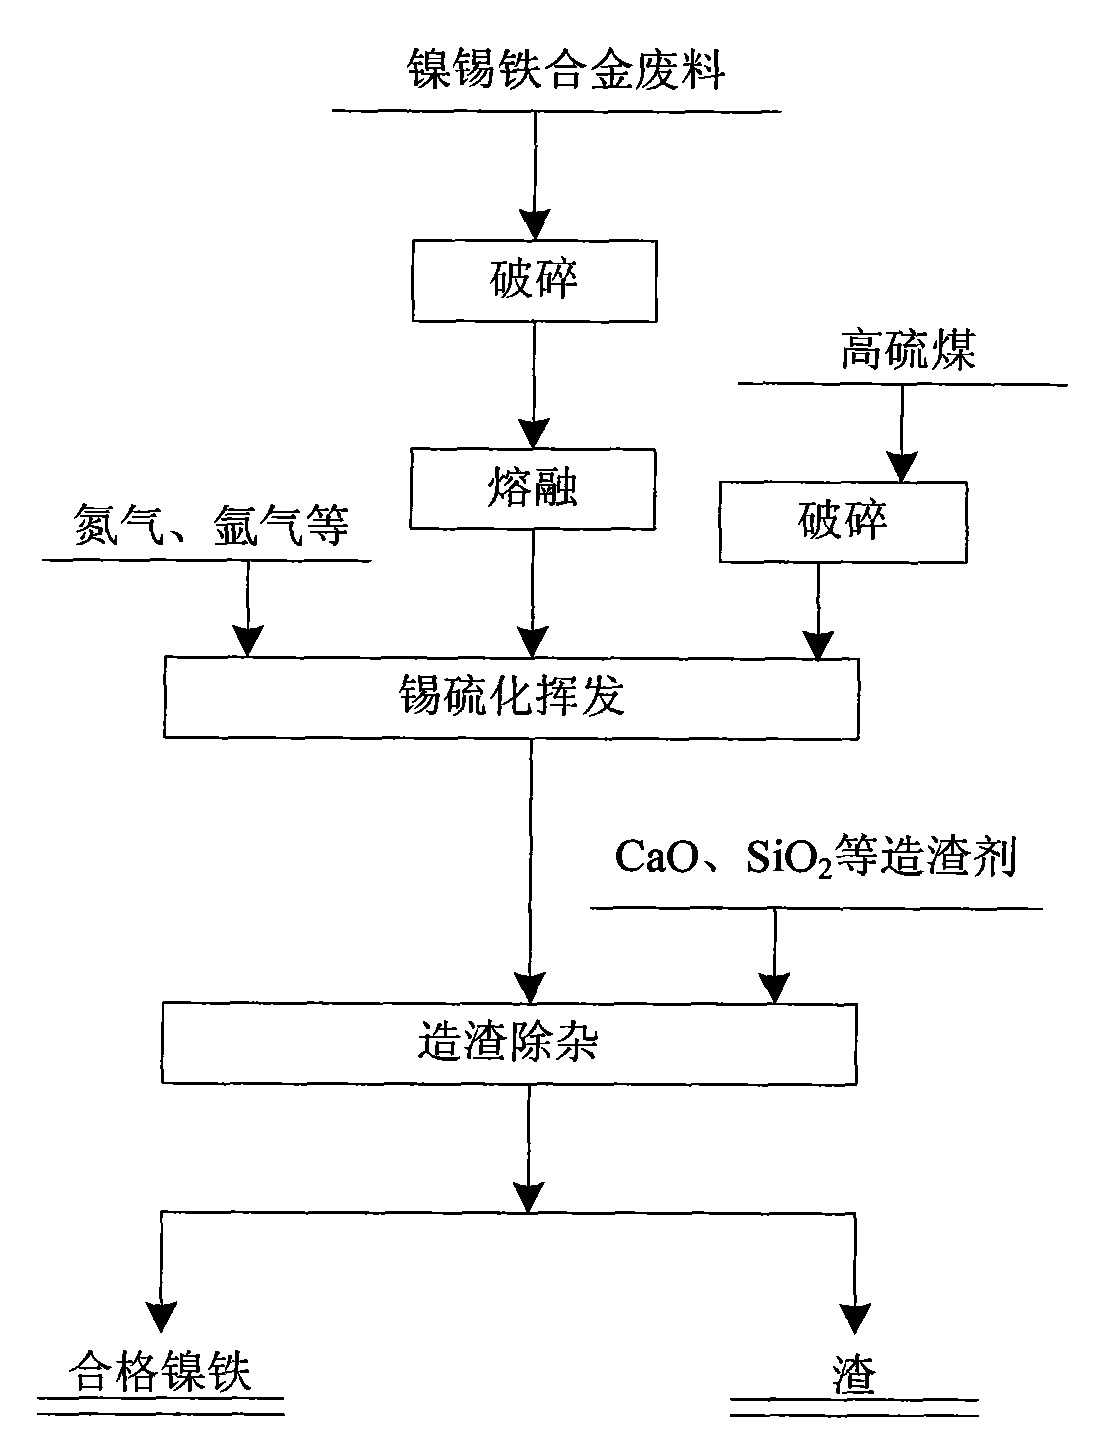 Method for Ni-Fe alloy production and Sn recovery from Ni-Sn ferroalloy scrap by high-sulfur coal sulfuration volatilization and oxidation slagging